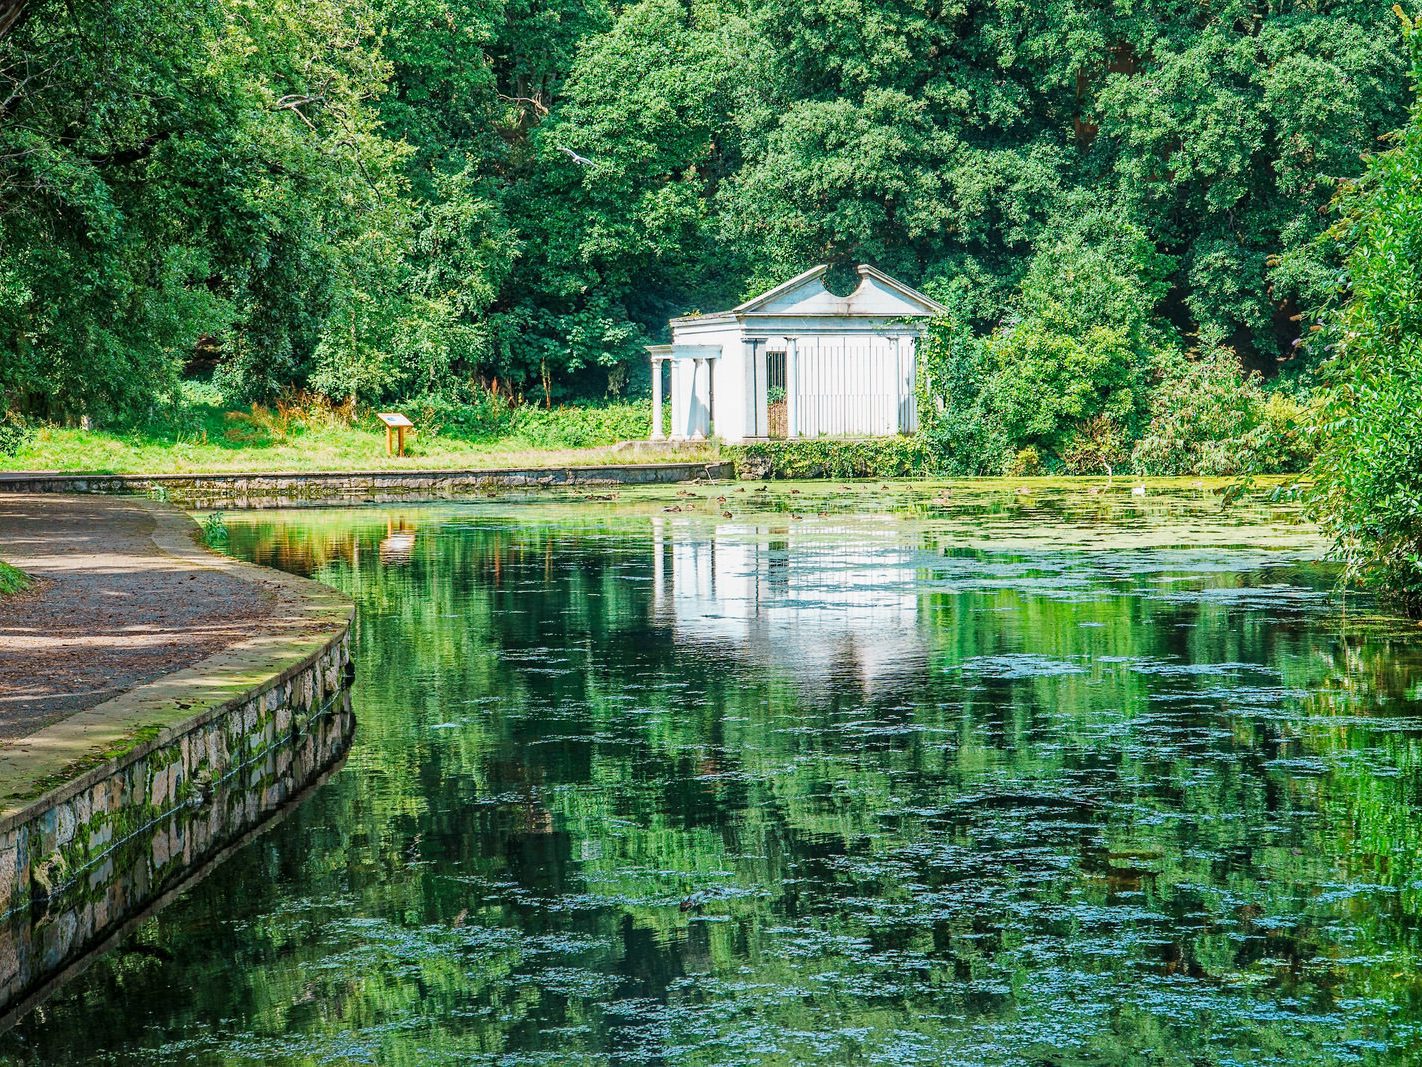 TEMPLE AND POND AT ST ANNE'S PARK IN RAHENY [ALSO KNOWN AS THE BOATHOUSE] 013